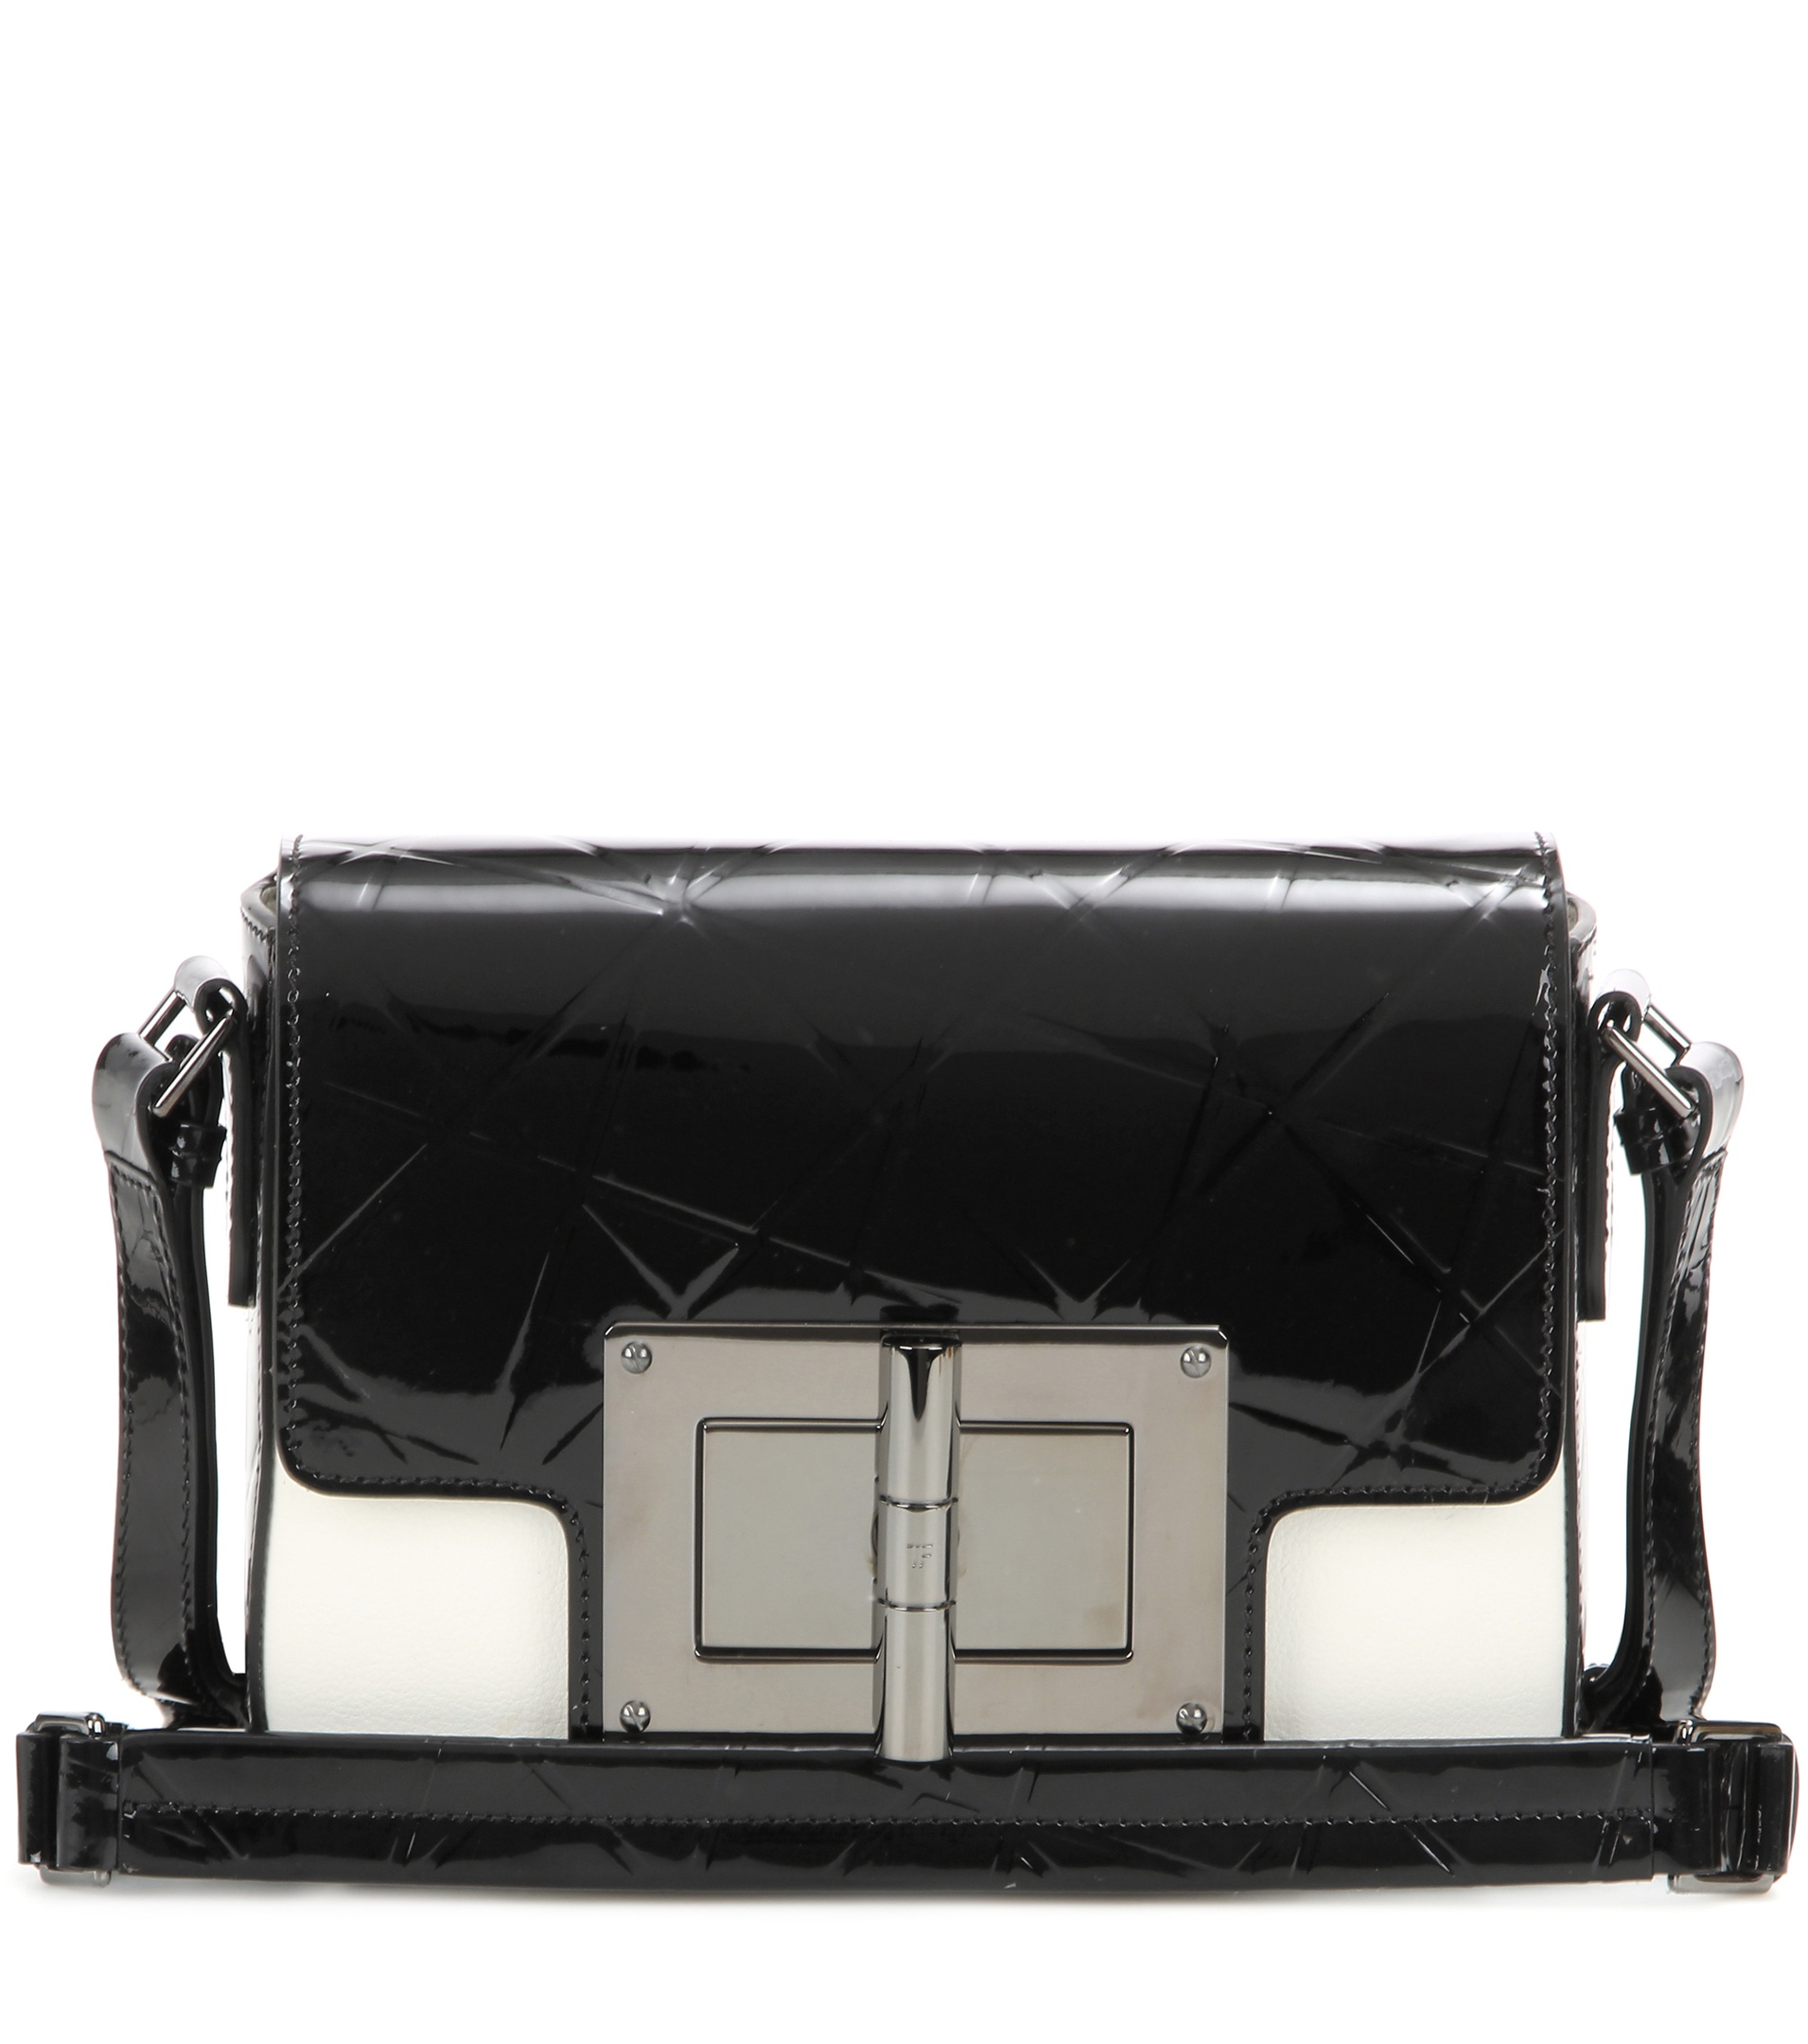 Tom Ford Natalia Small Patent Leather Shoulder Bag in Black - Lyst